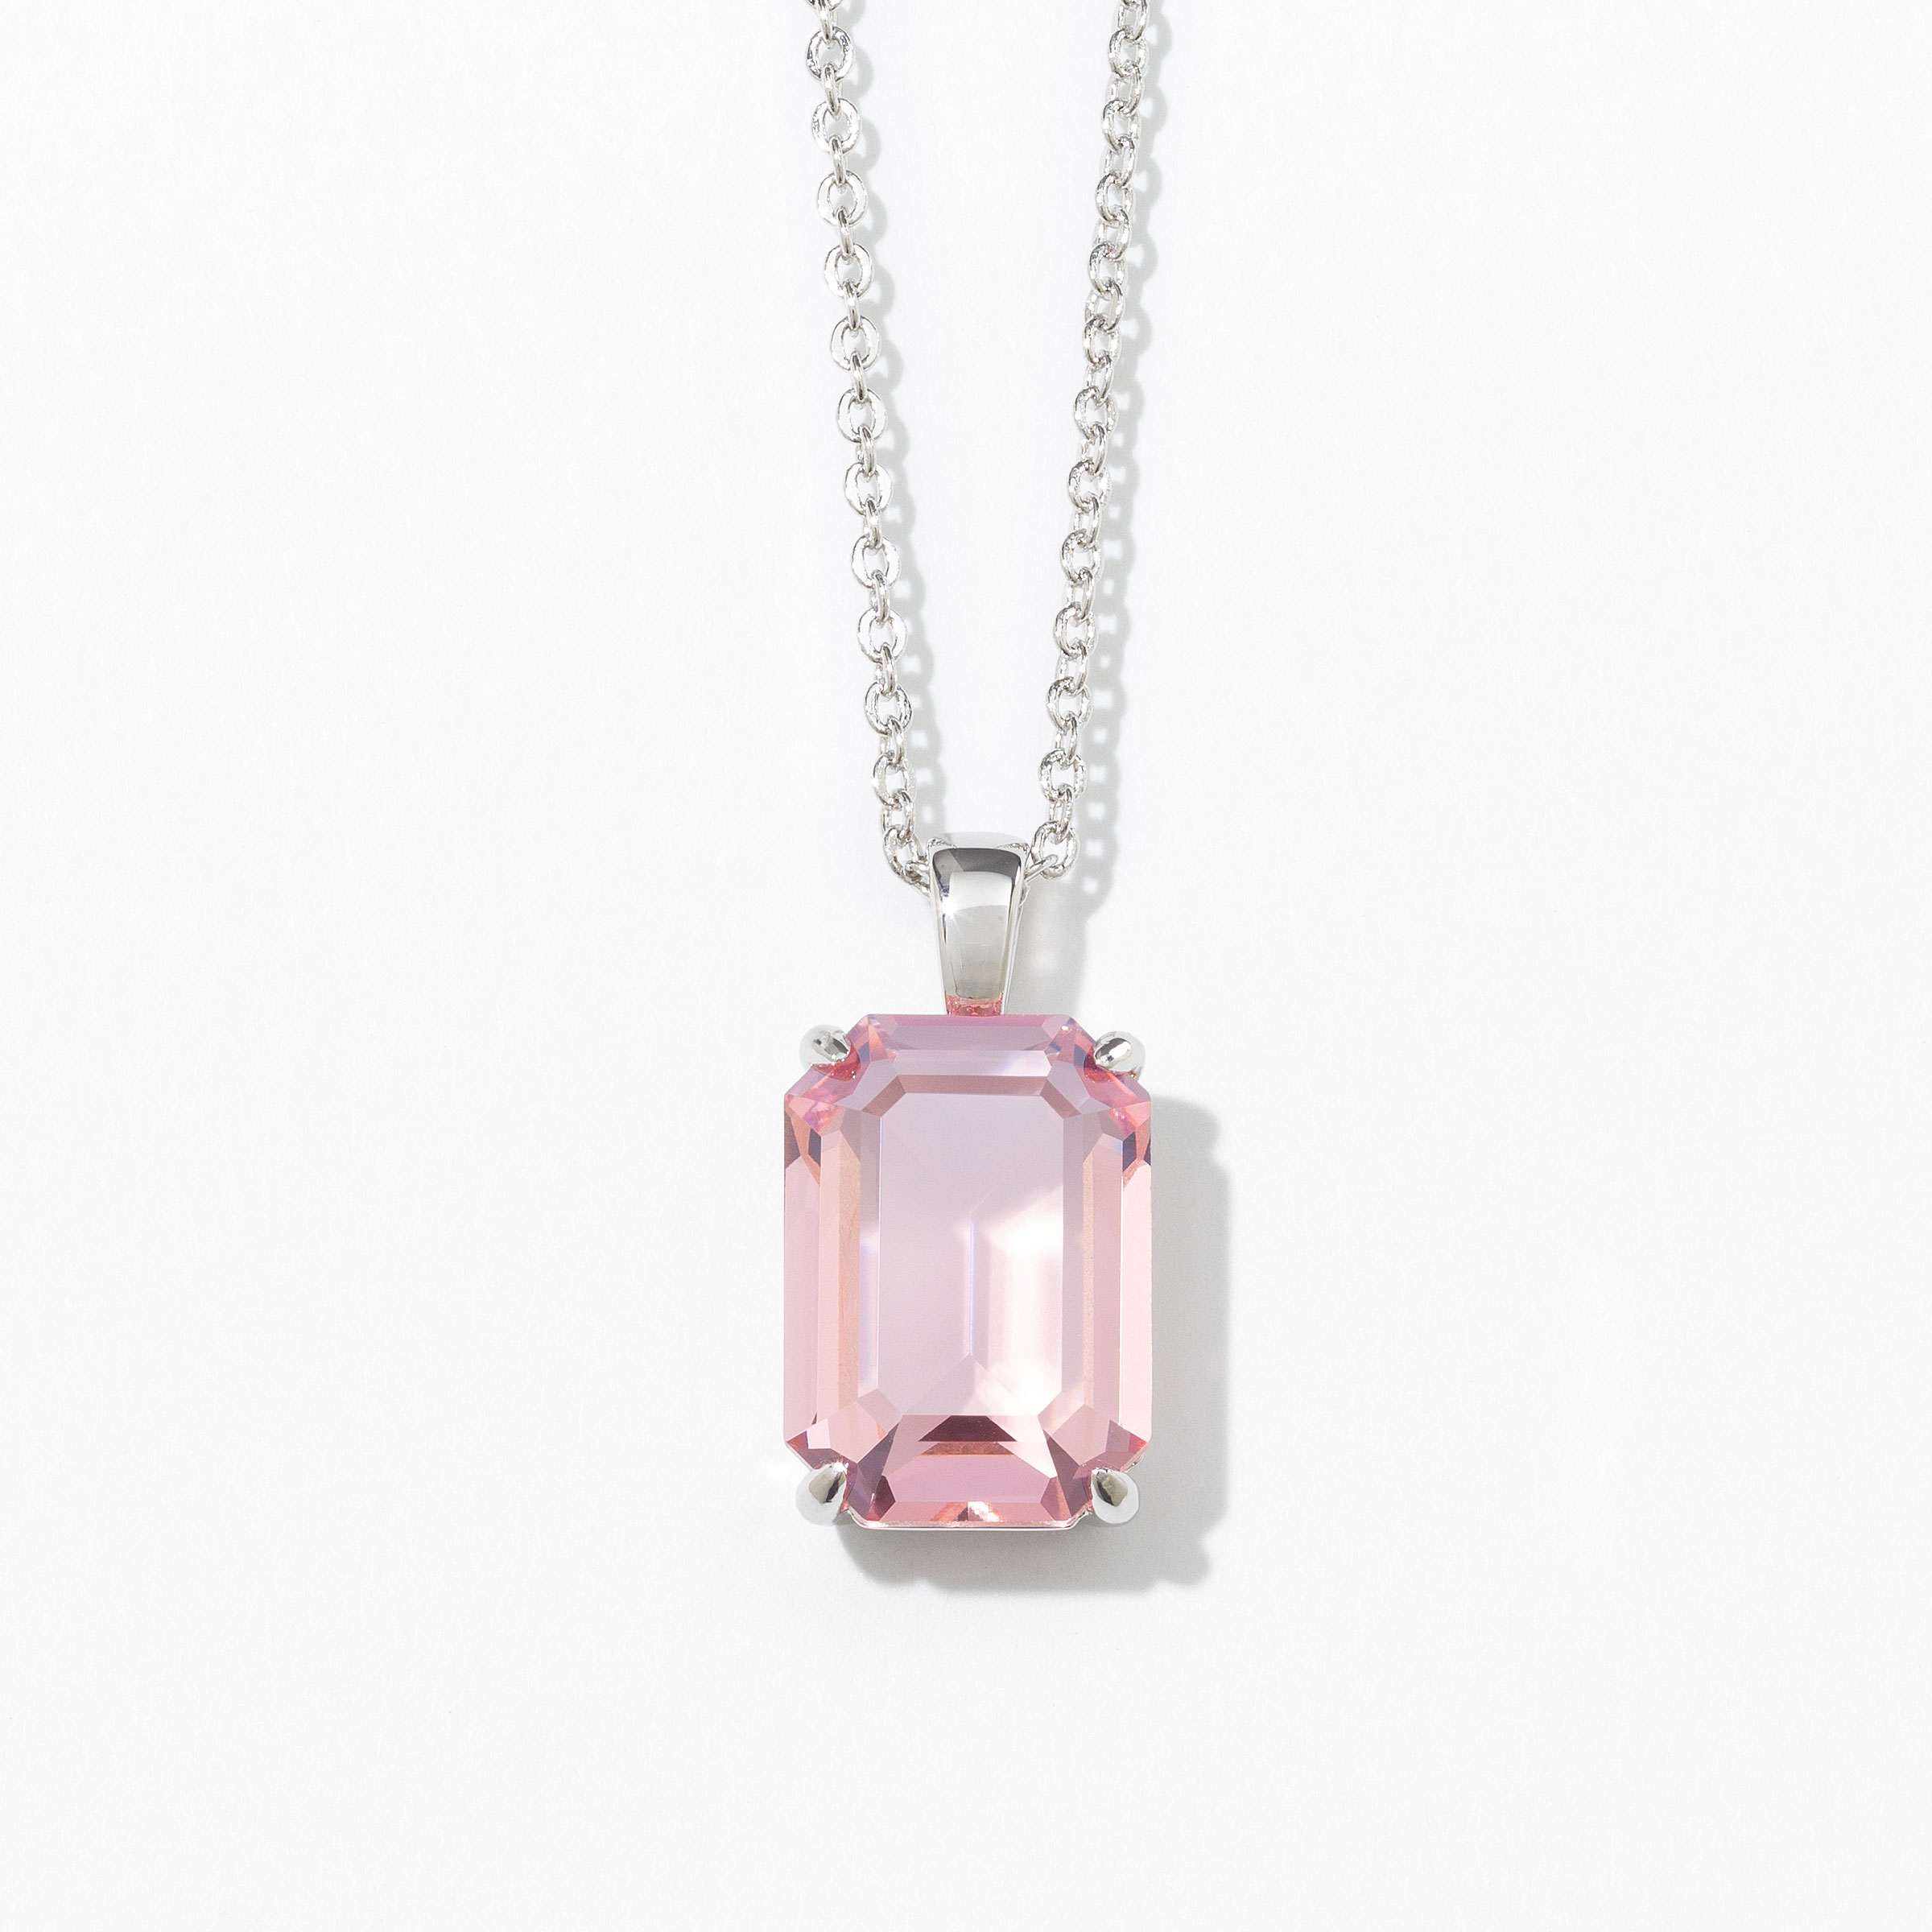 Barrington One Necklace, Pink